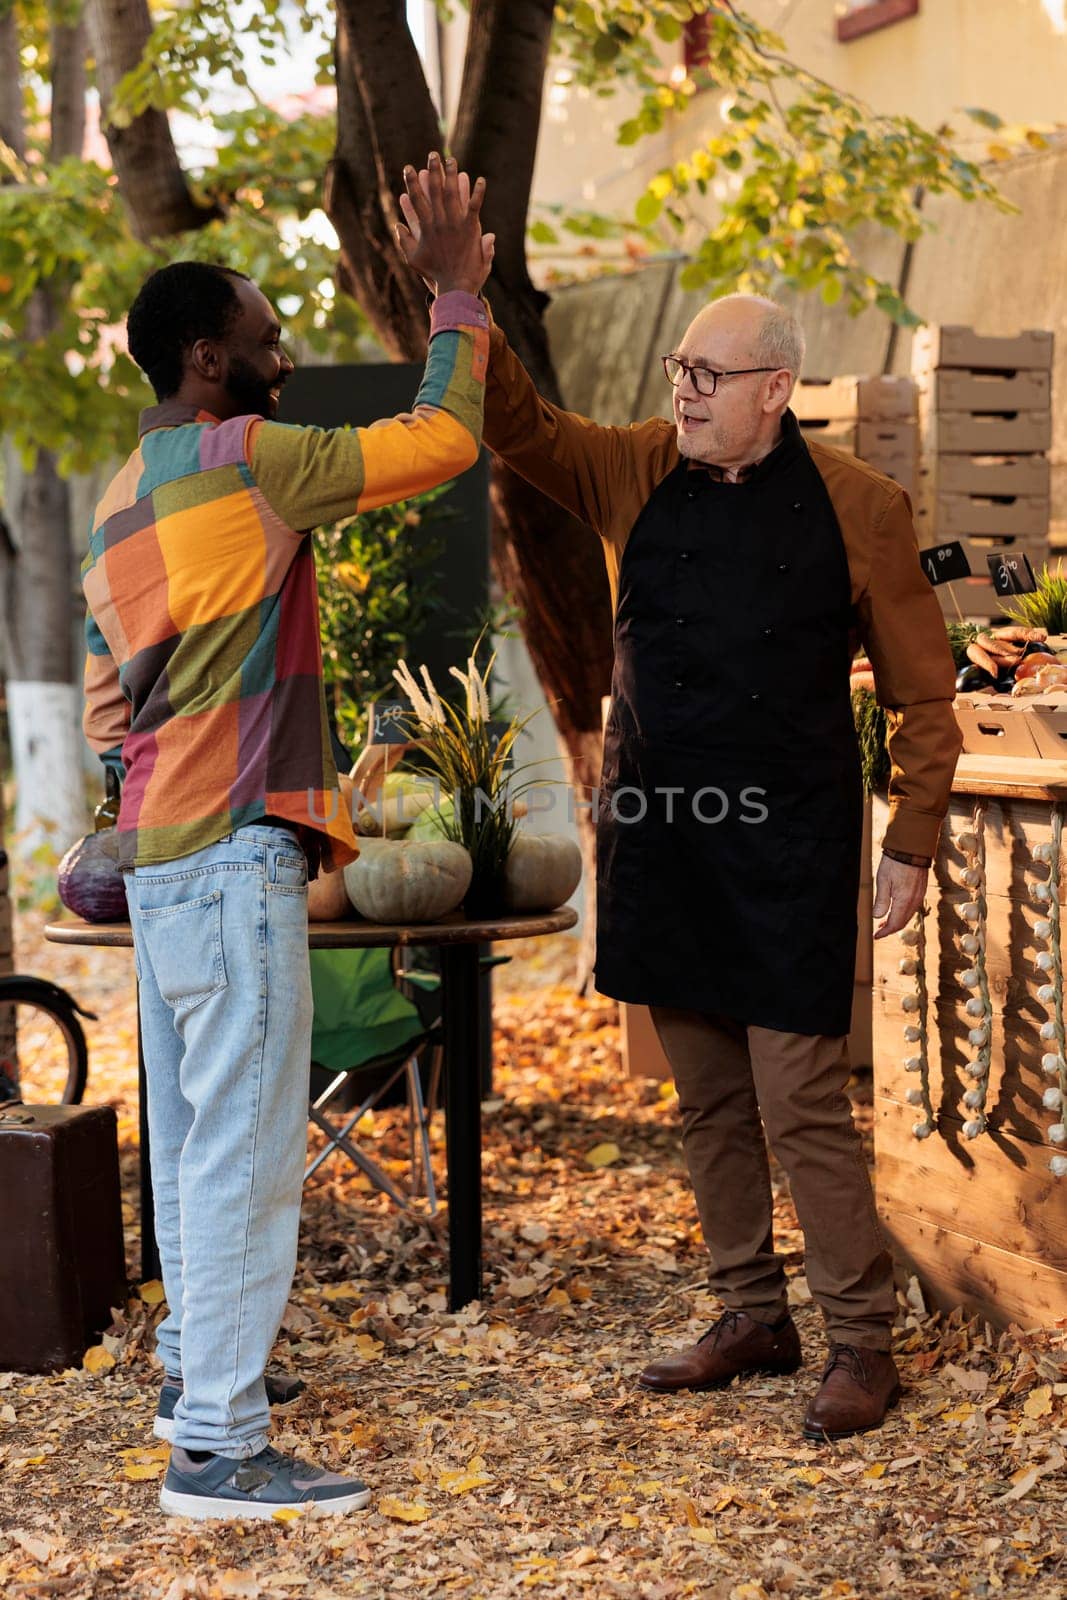 Positive small business owner greeting man with highfive, enjoying visit from loyal customer at local farmers market stand. Smiling happy people having fun at food fair, organic fresh produce.